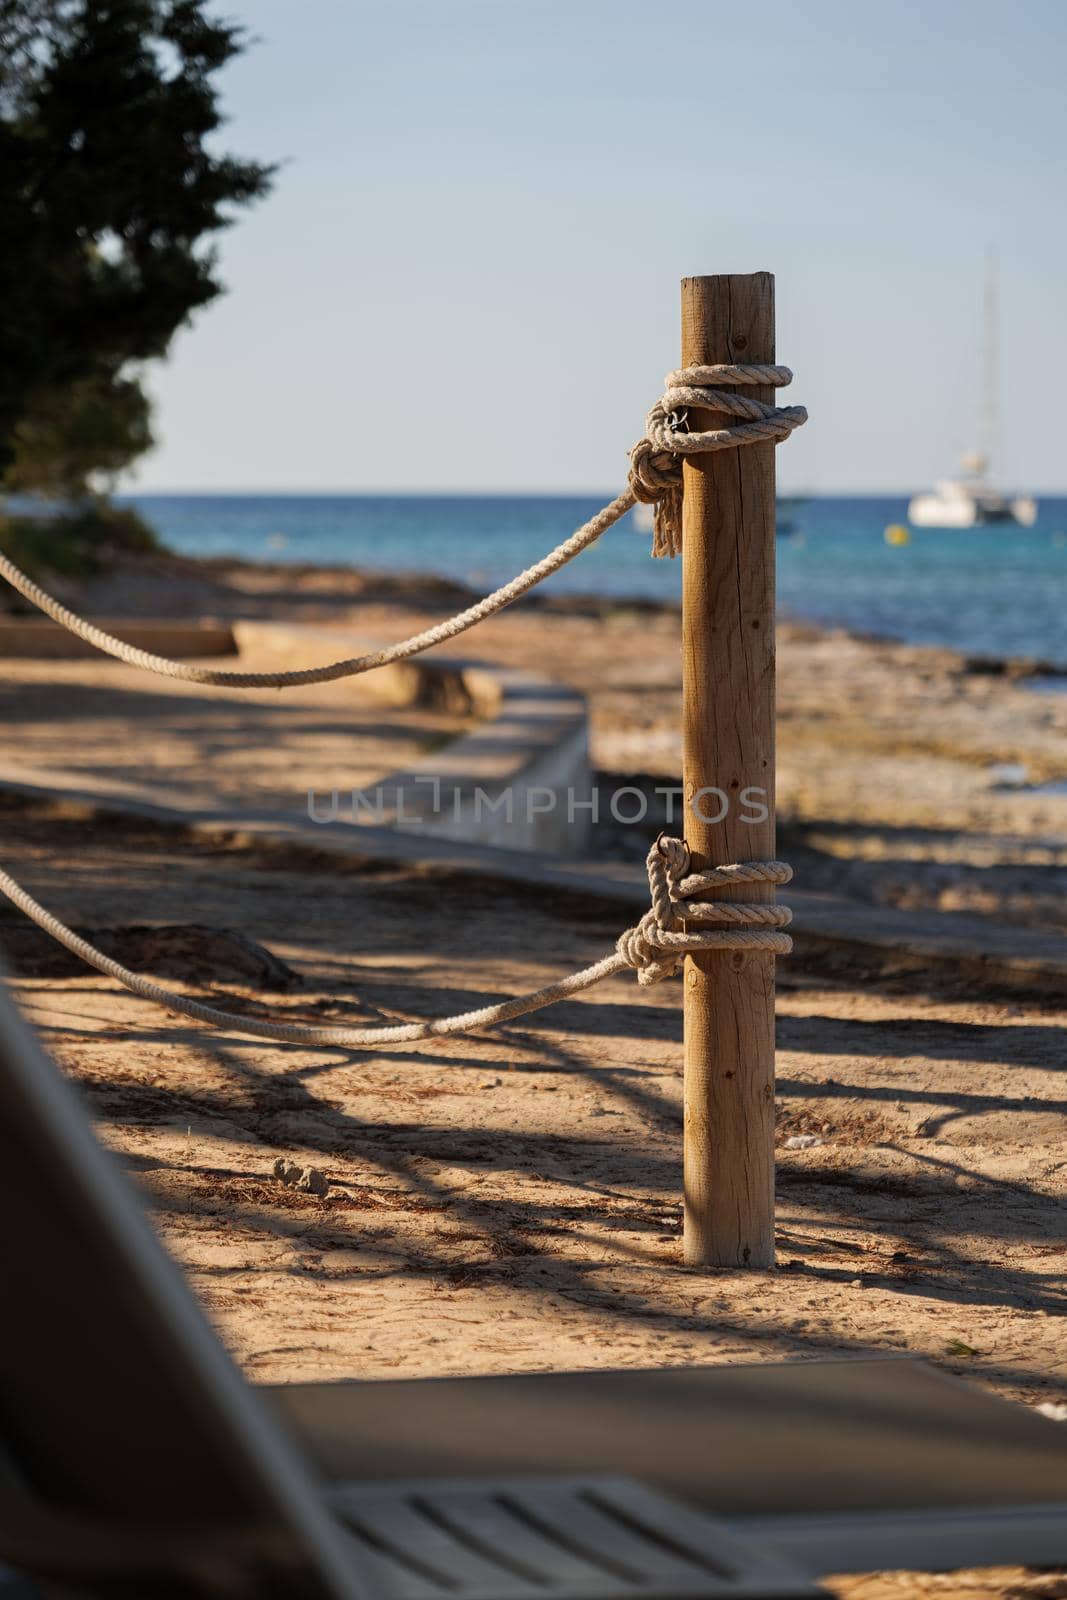 Wooden pole with ropes at the beach with view to sea and yacht. Calm atmosphere at the evening resort. by apavlin